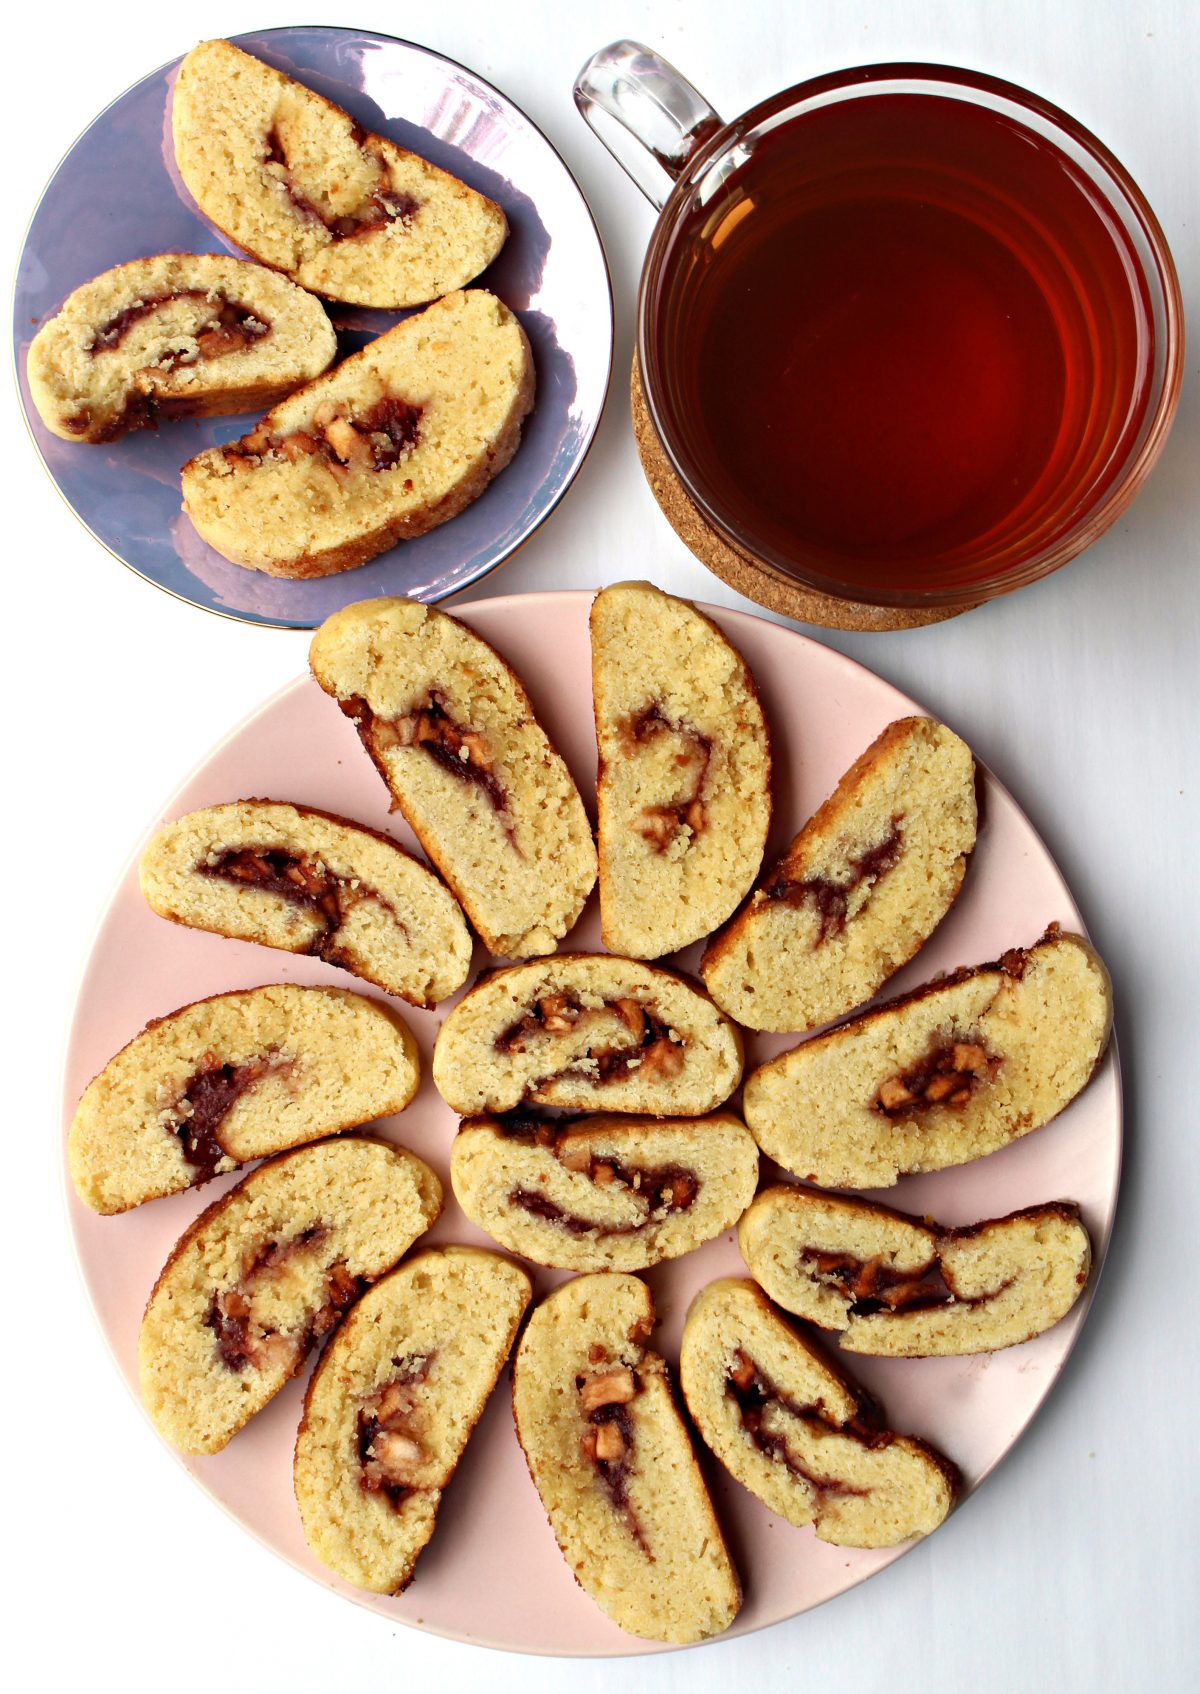 Plates with cookie slices made from dough logs with cherry jam centers.